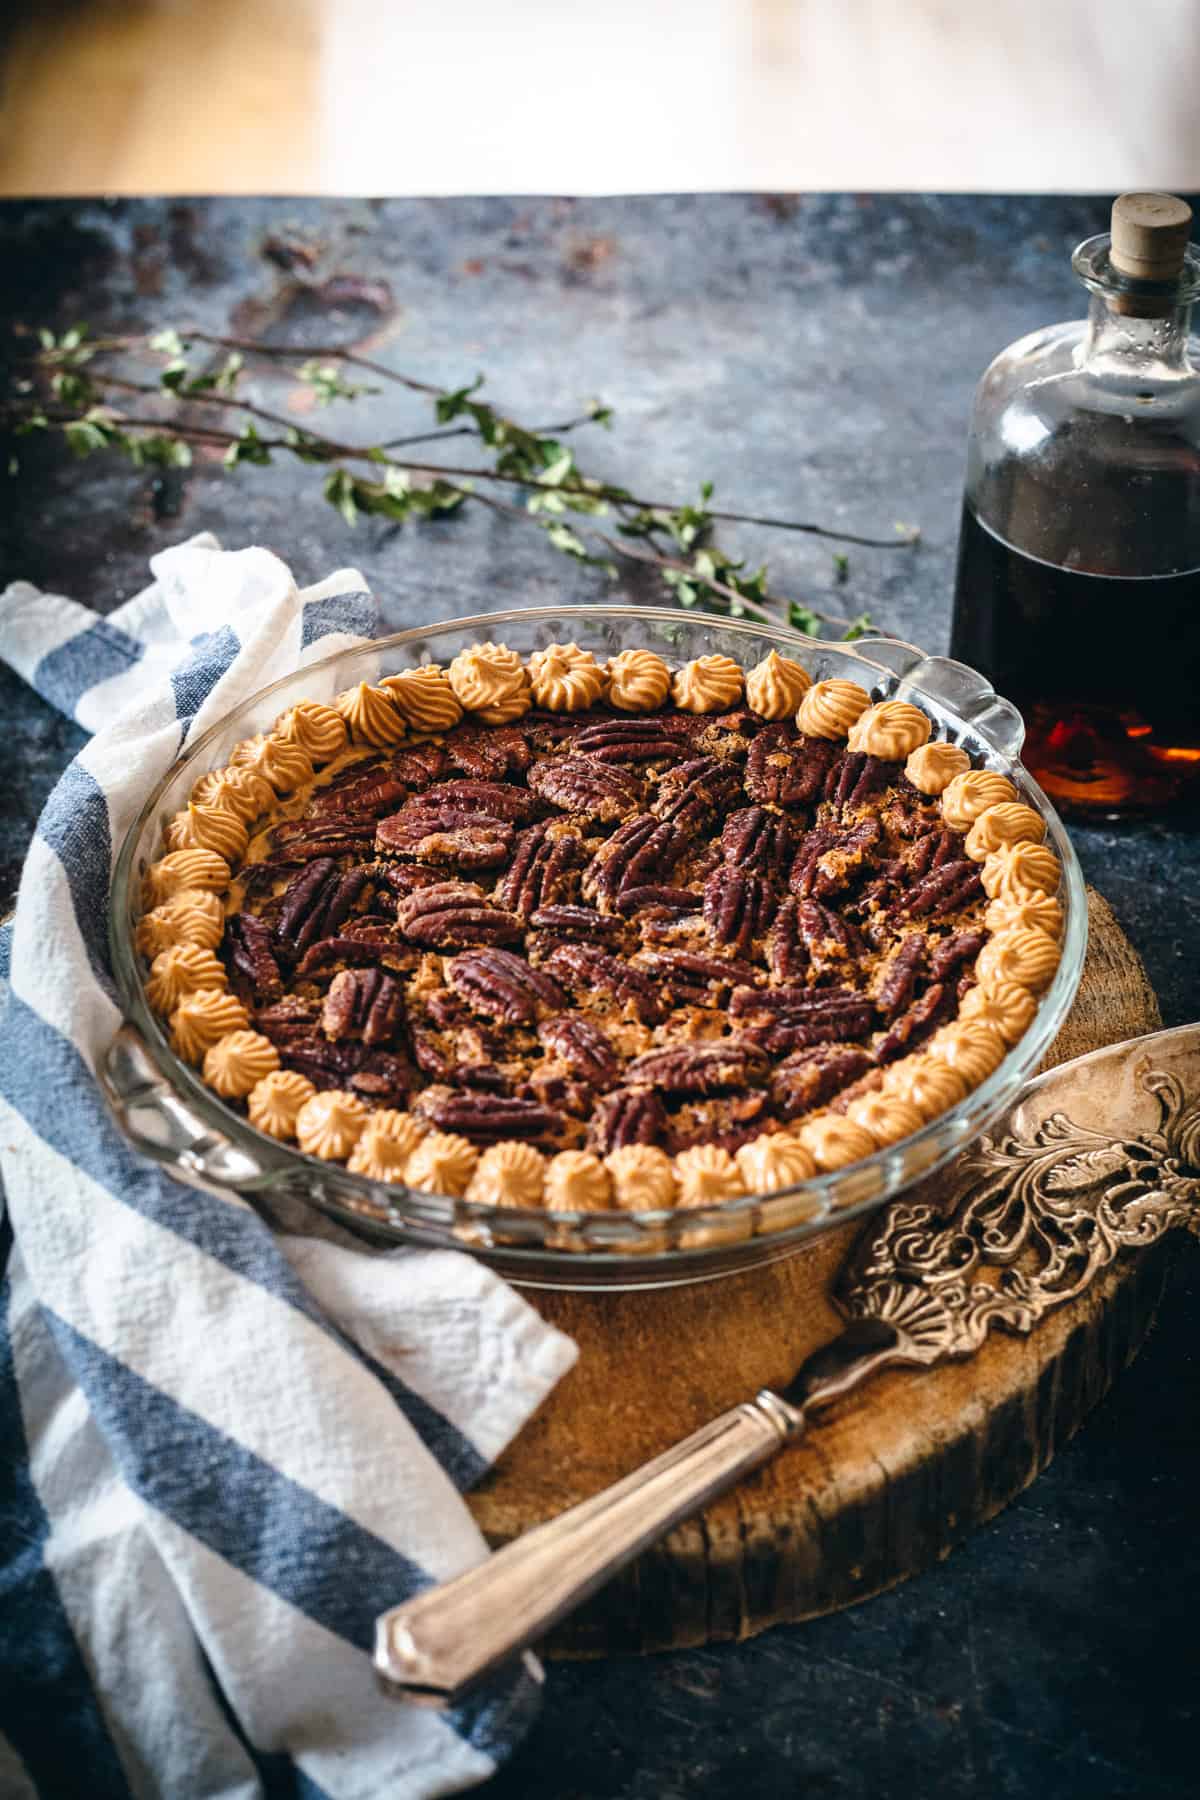 baked gluten free pecan pie decorated with maple syrup bottle